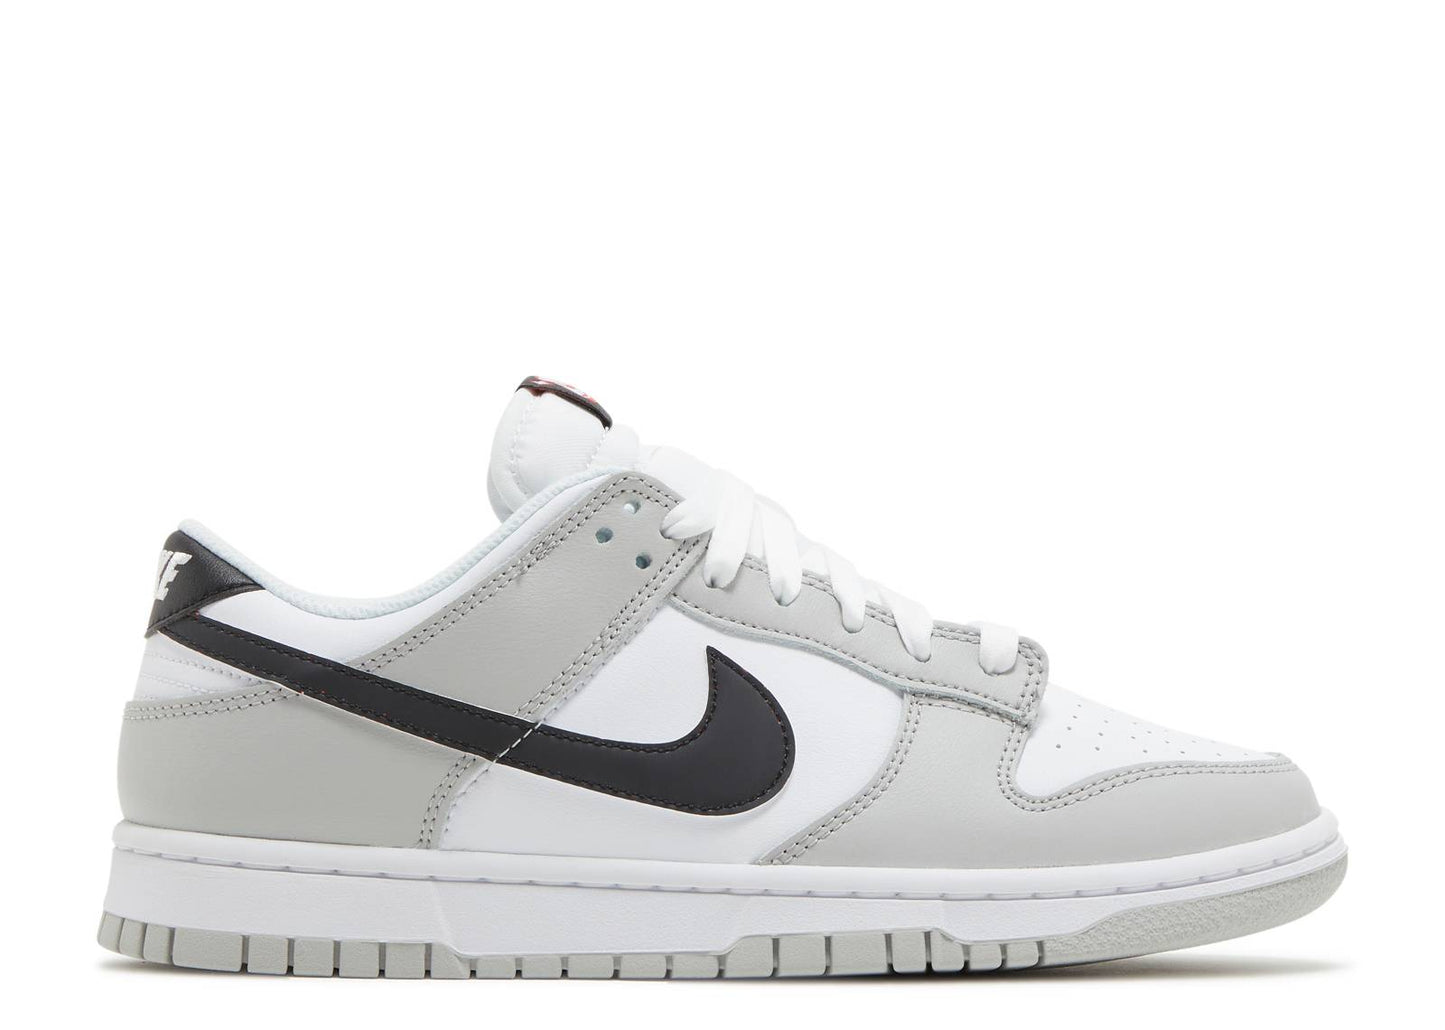 Dunk Low SE Lottery Pack - Grey Fog